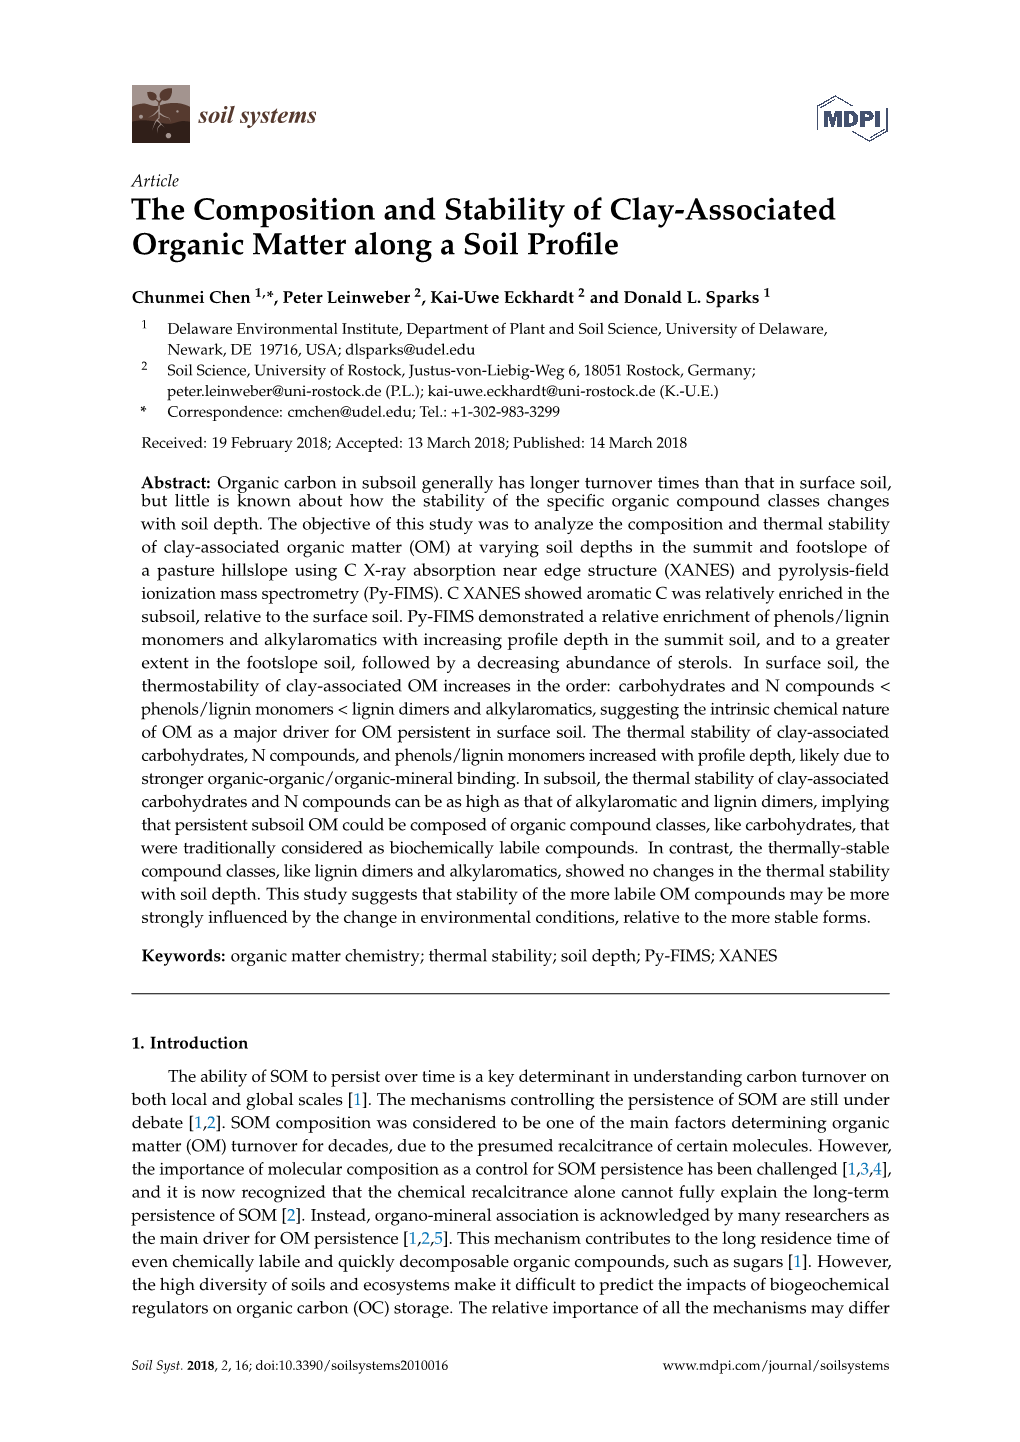 The Composition and Stability of Clay-Associated Organic Matter Along a Soil Proﬁle